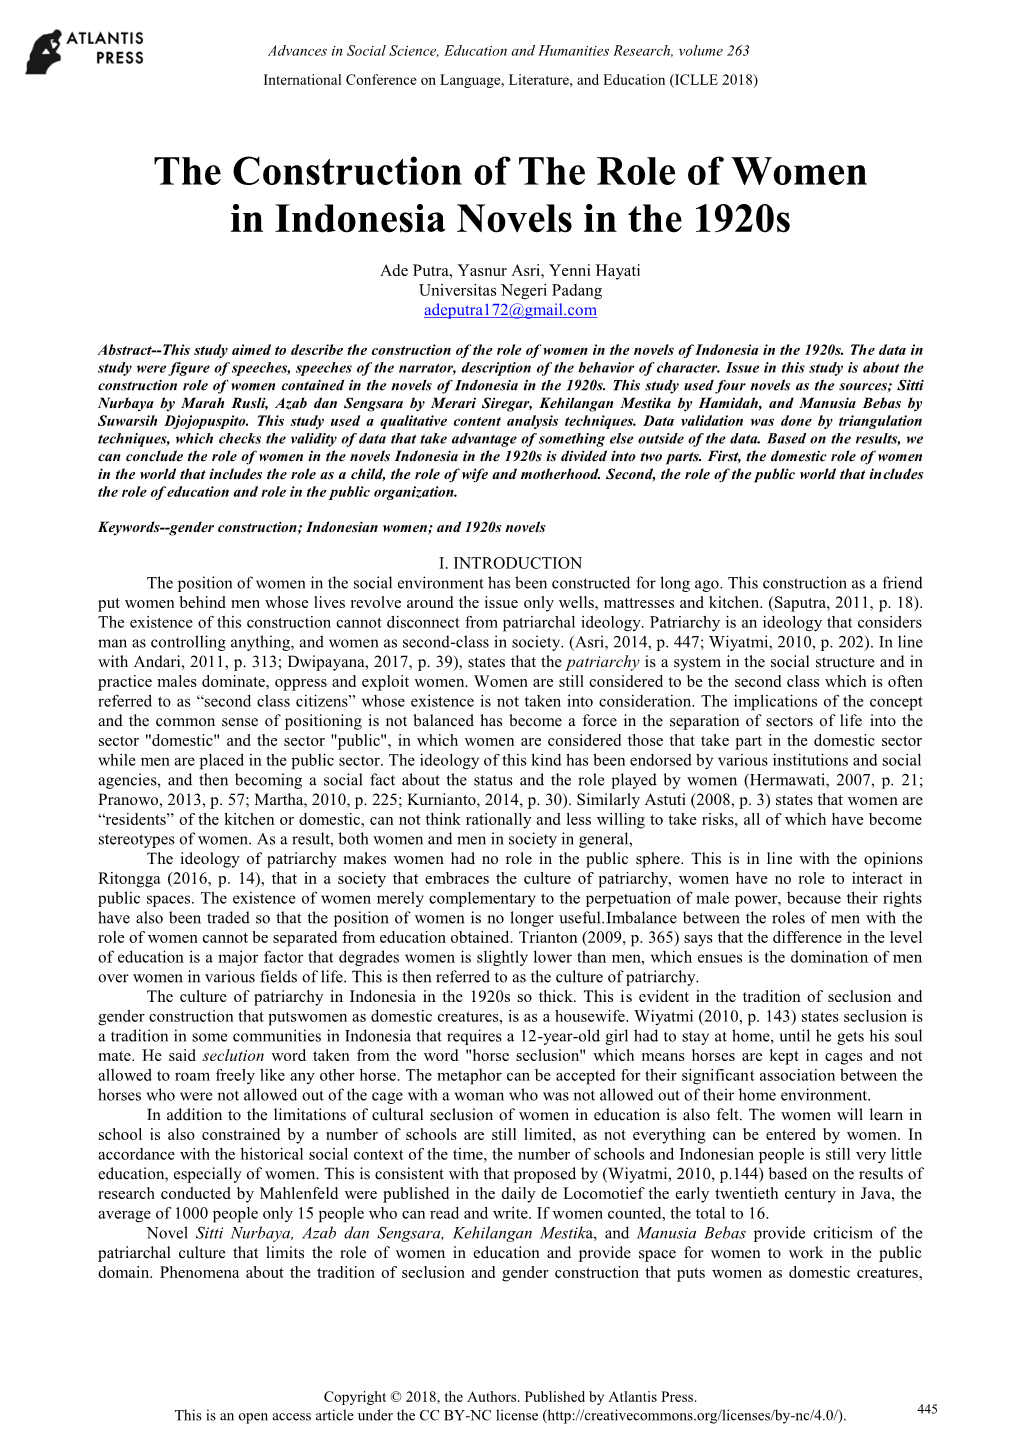 The Construction of the Role of Women in Indonesia Novels in the 1920S